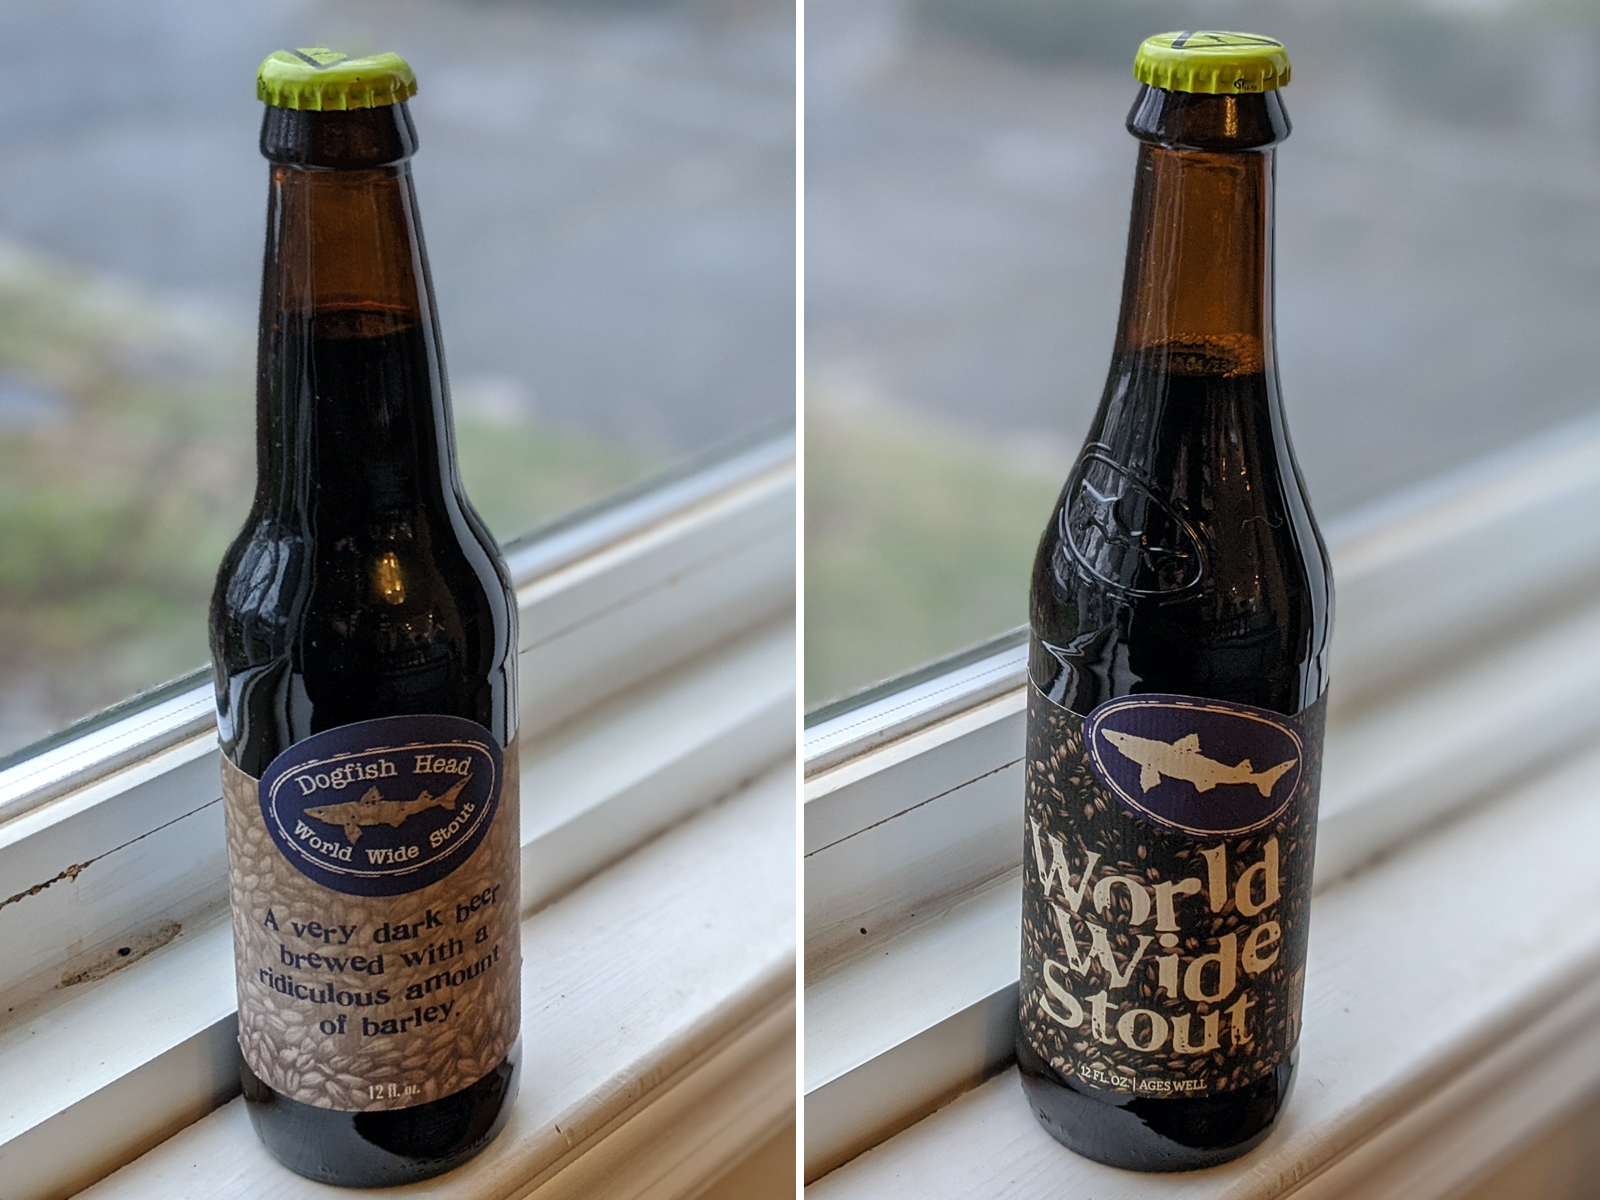 2009 and 2019 World Wide Stout from Dogfish Head Craft Brewery